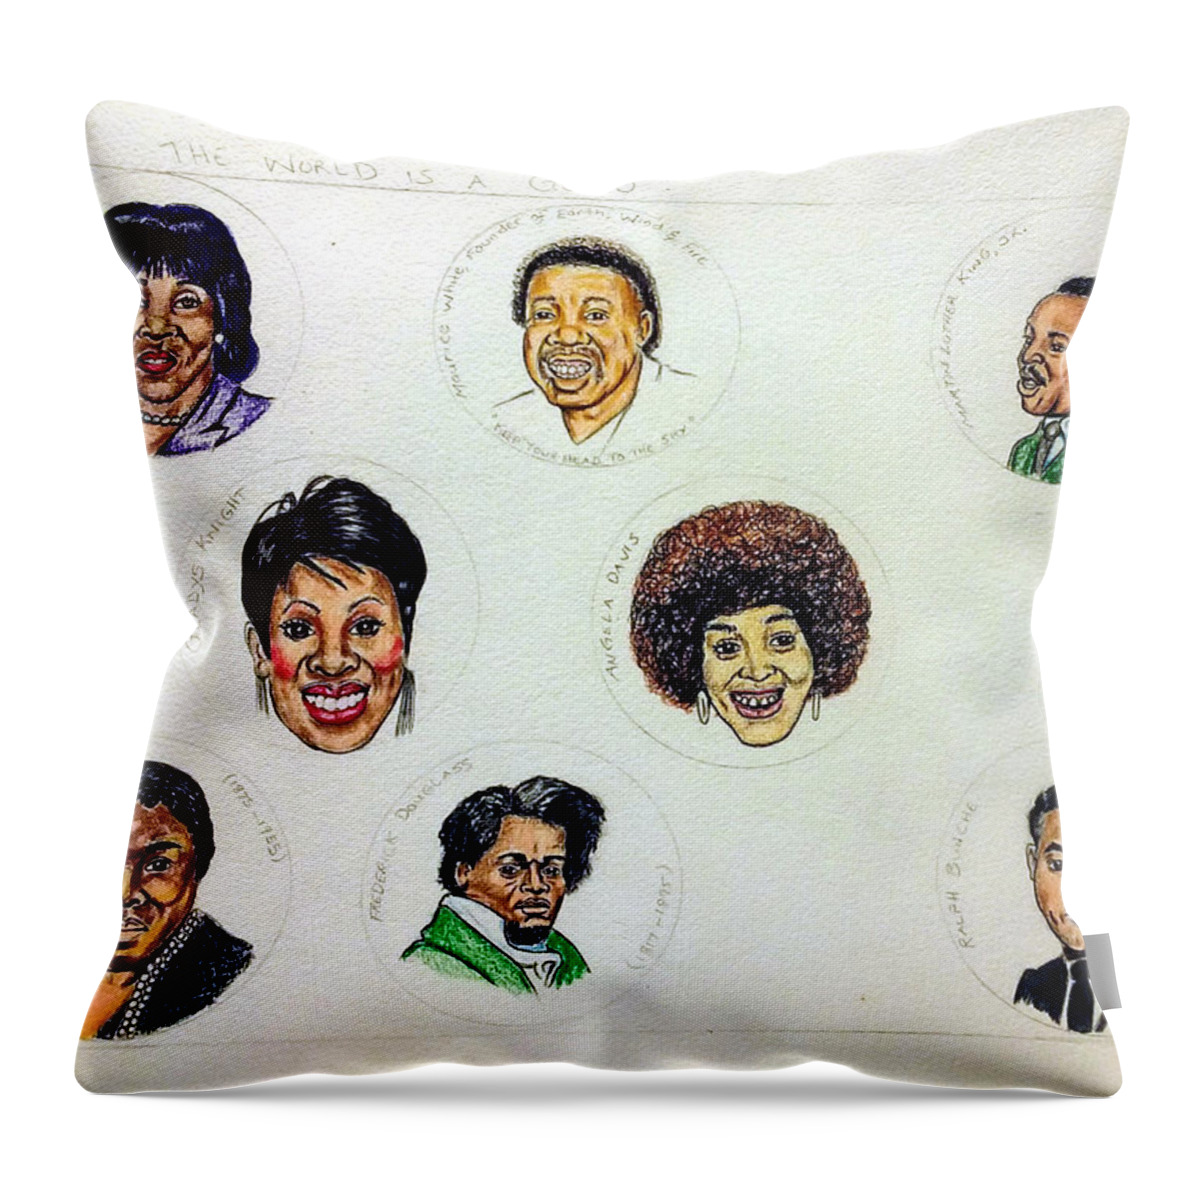 Black Art Throw Pillow featuring the drawing Maxine, Maurice, Martin, Gladys, Angela, Mary, Frederick, and Ralph by Joedee